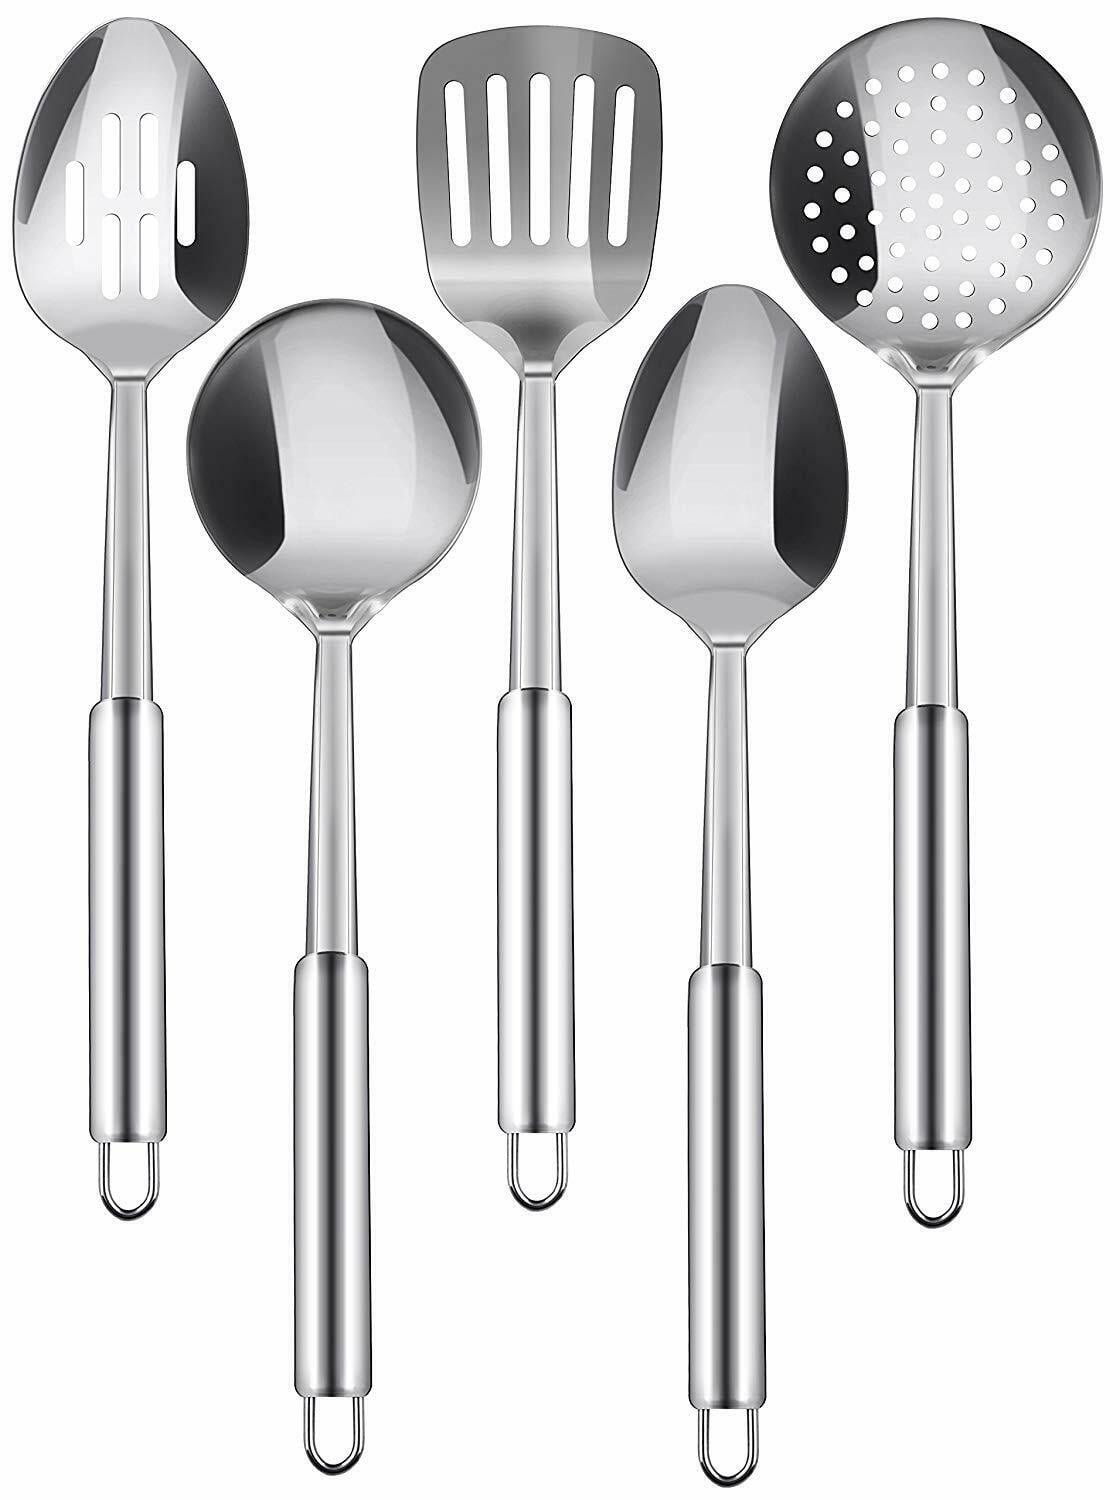 Slotted Spoon 5-Piece Serving Spoons Includes Ladle Benlasen Kitchen Stainless Steel Cooking Utensils Set Slotted Turner Solid Spoon Skimmer